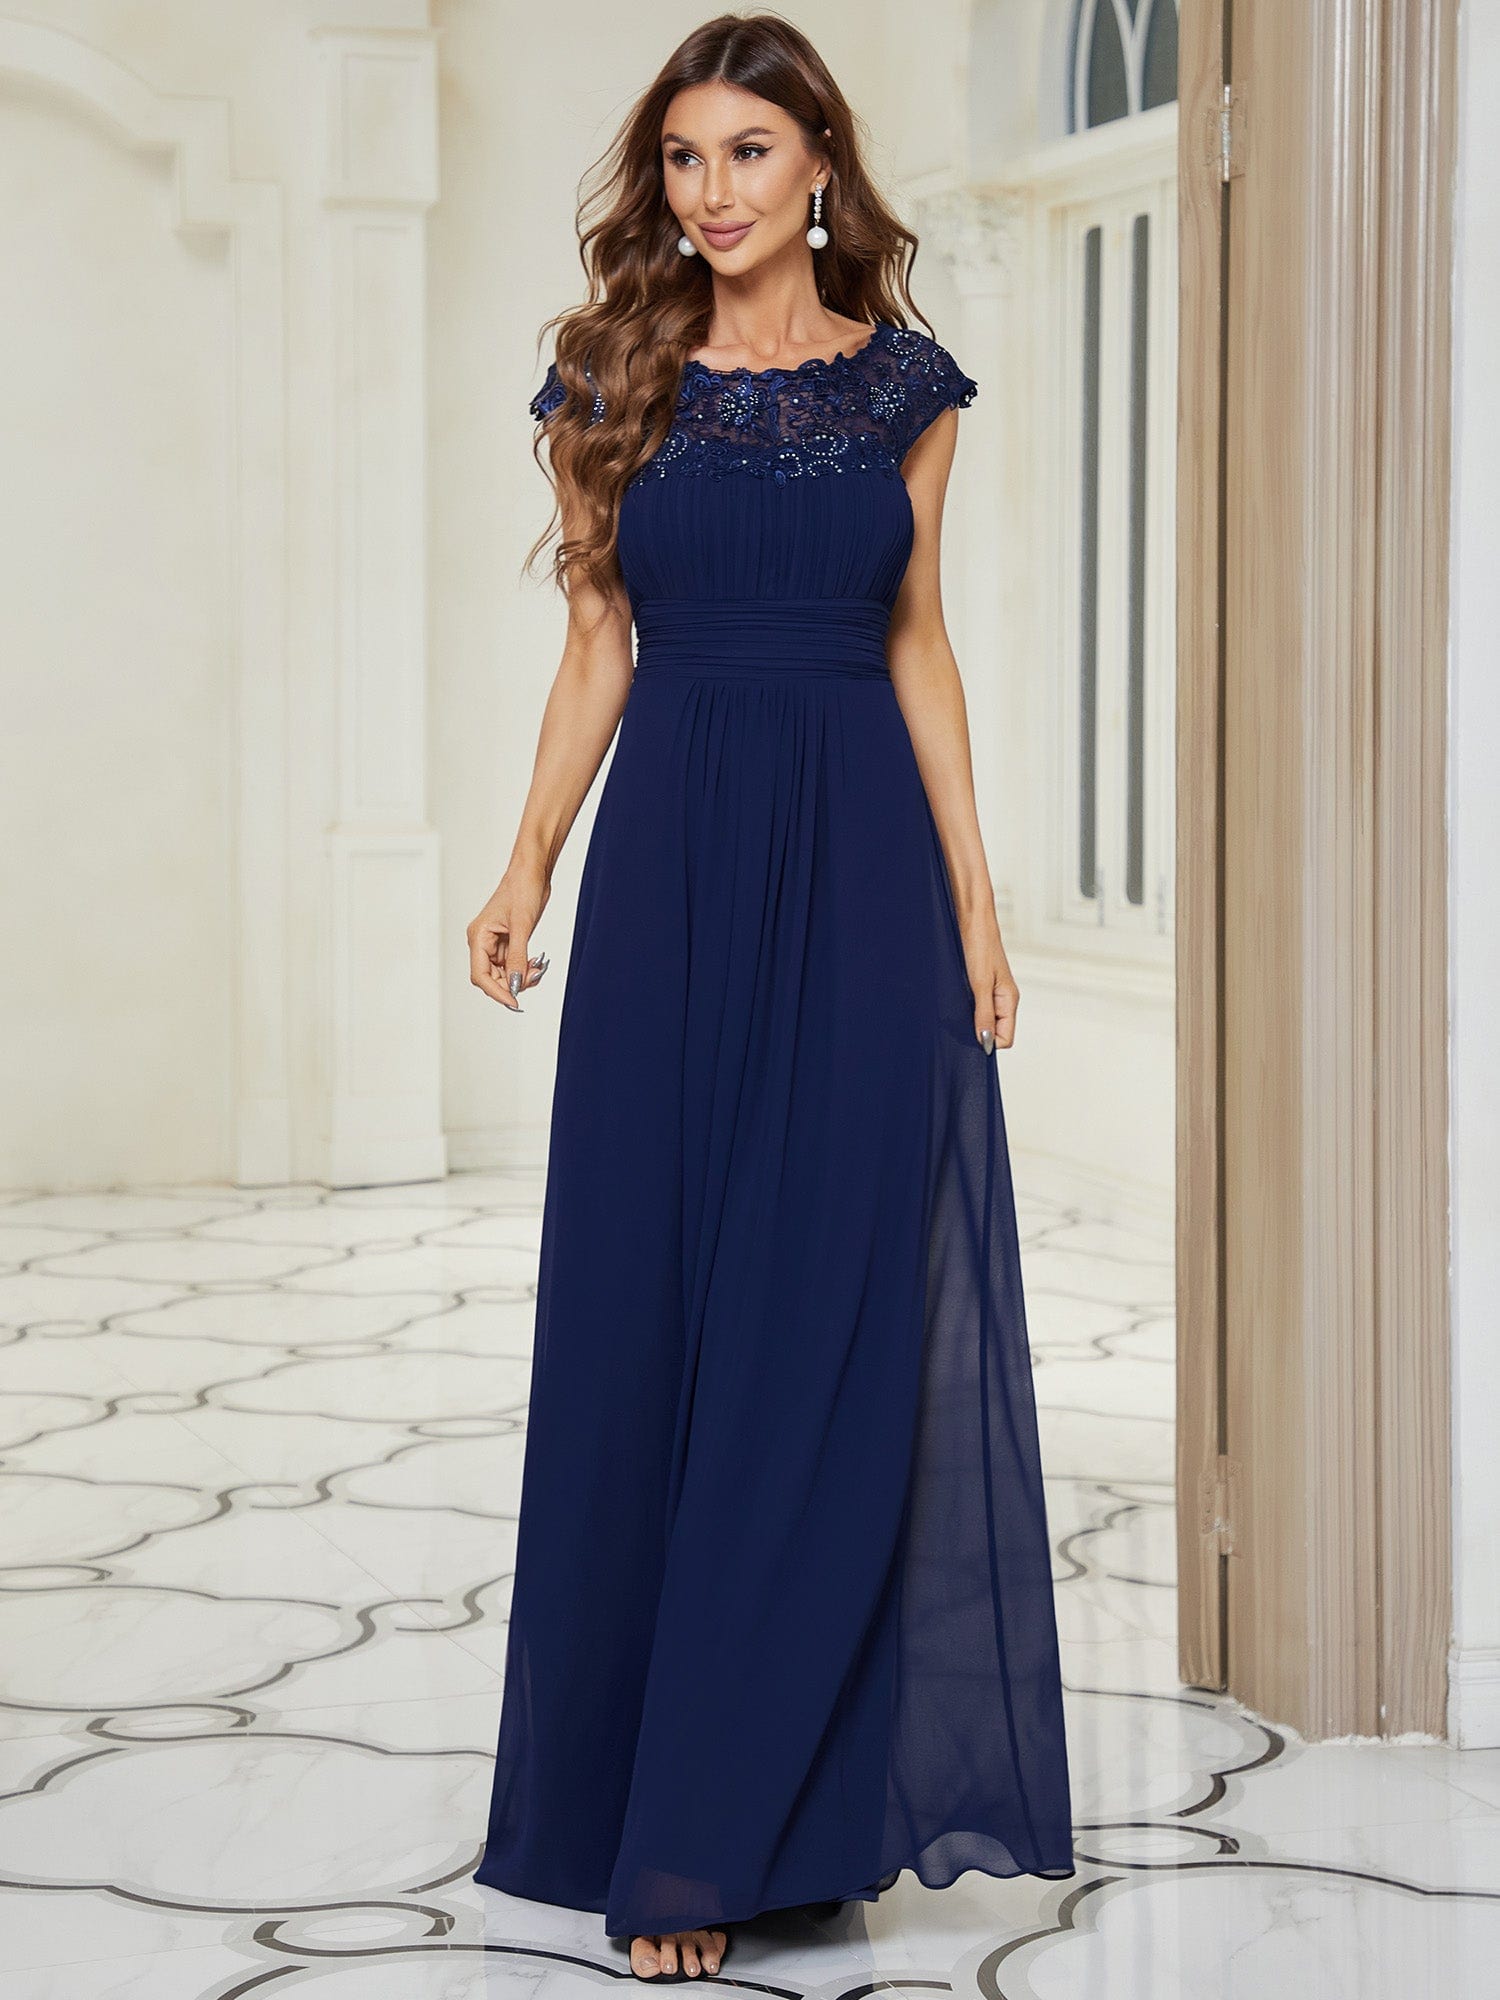 Chic Pockets Peacock Blue Lace and Satin Prom Ball Gown - VQ